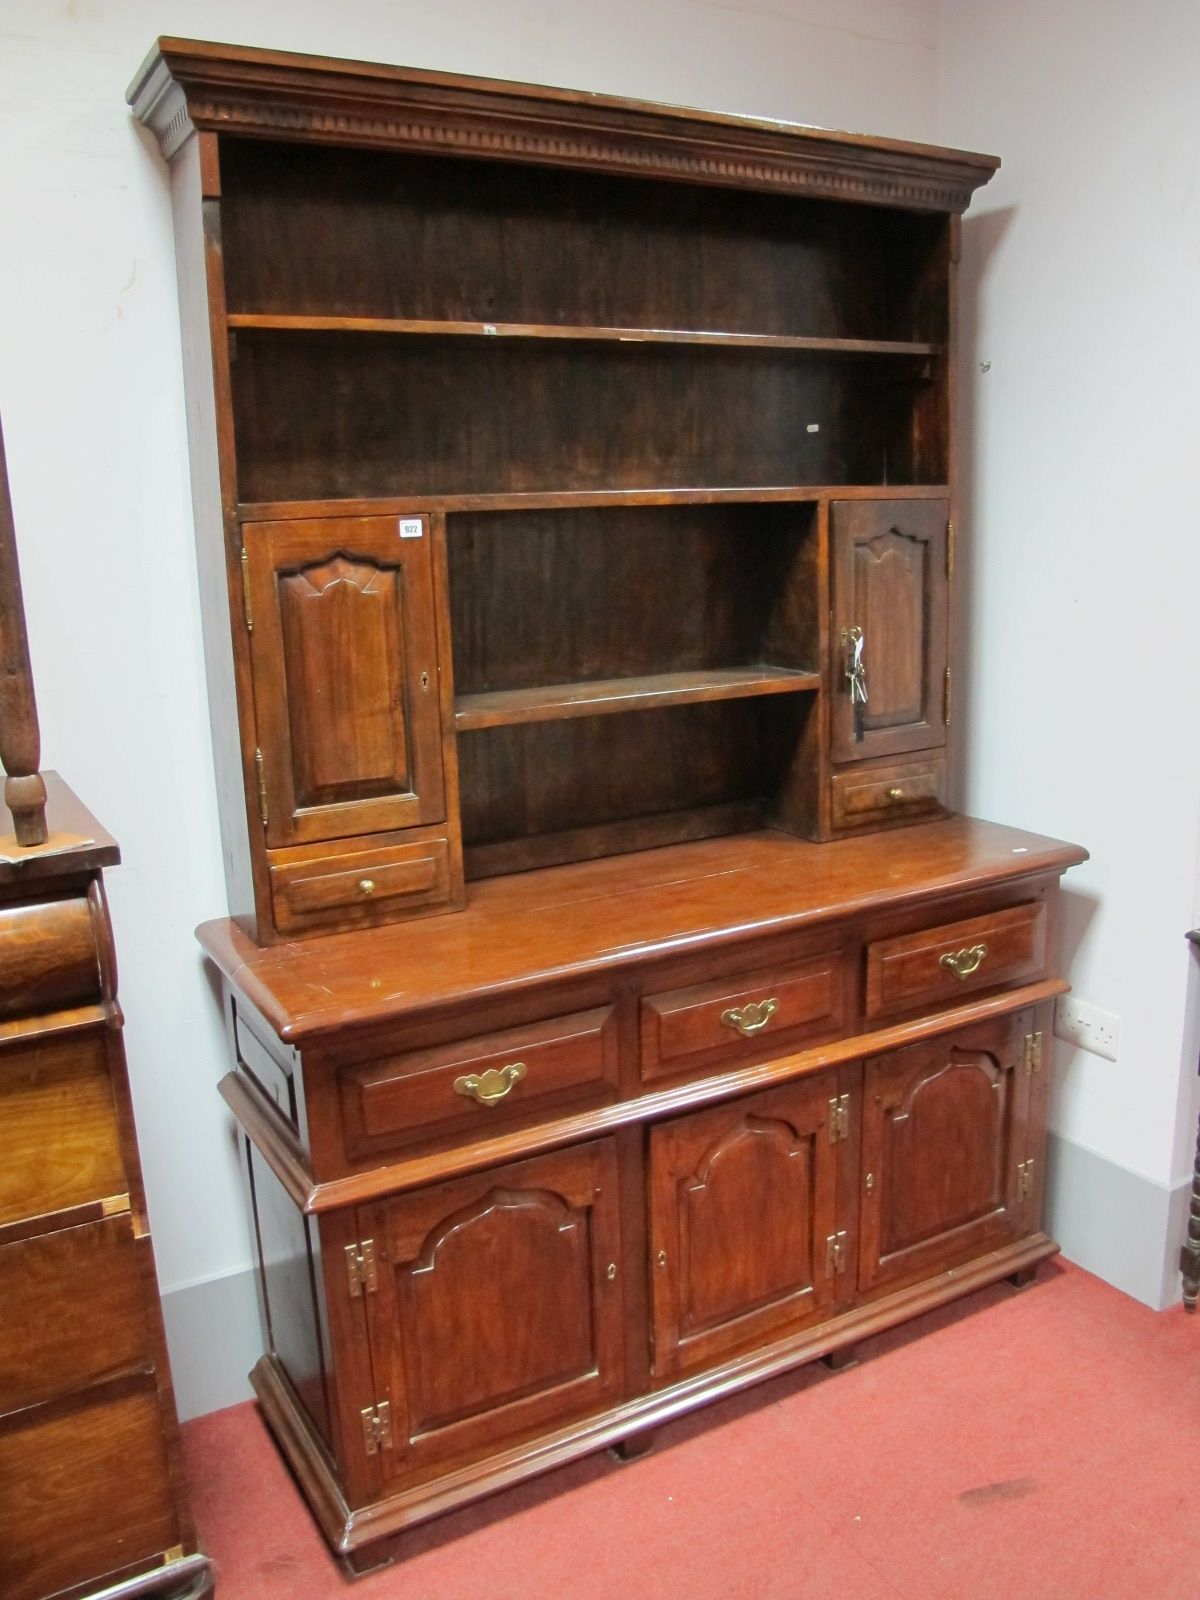 XVIII Century Style Dresser, with a dentil cornice, two open shelves, arched cupboard doors, base